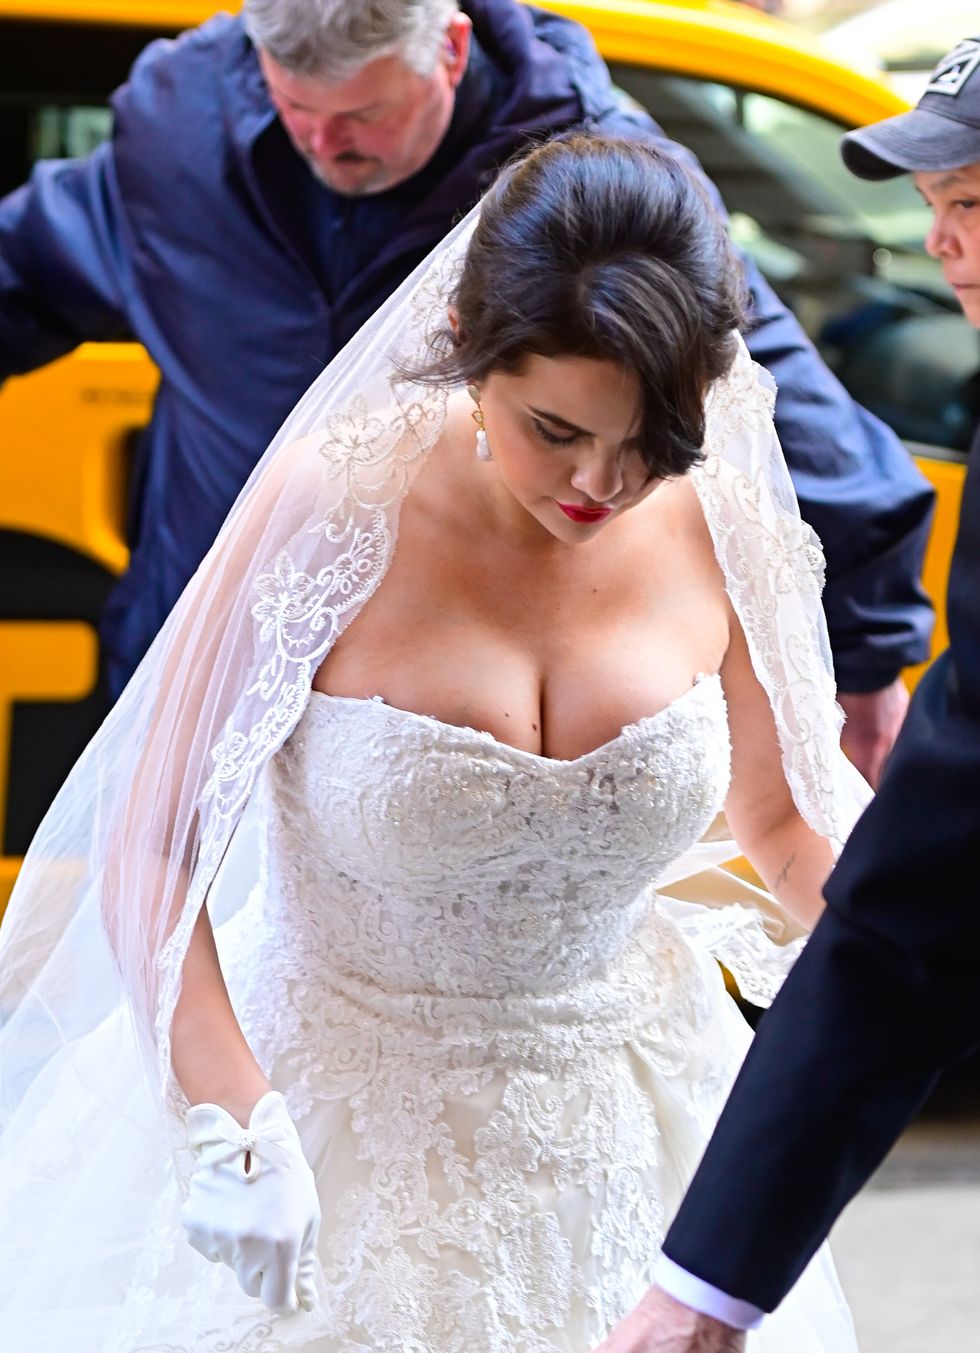 These Photos of Selena Gomez in a Wedding Dress on the Set of Only Murders in the Building Are Stunning